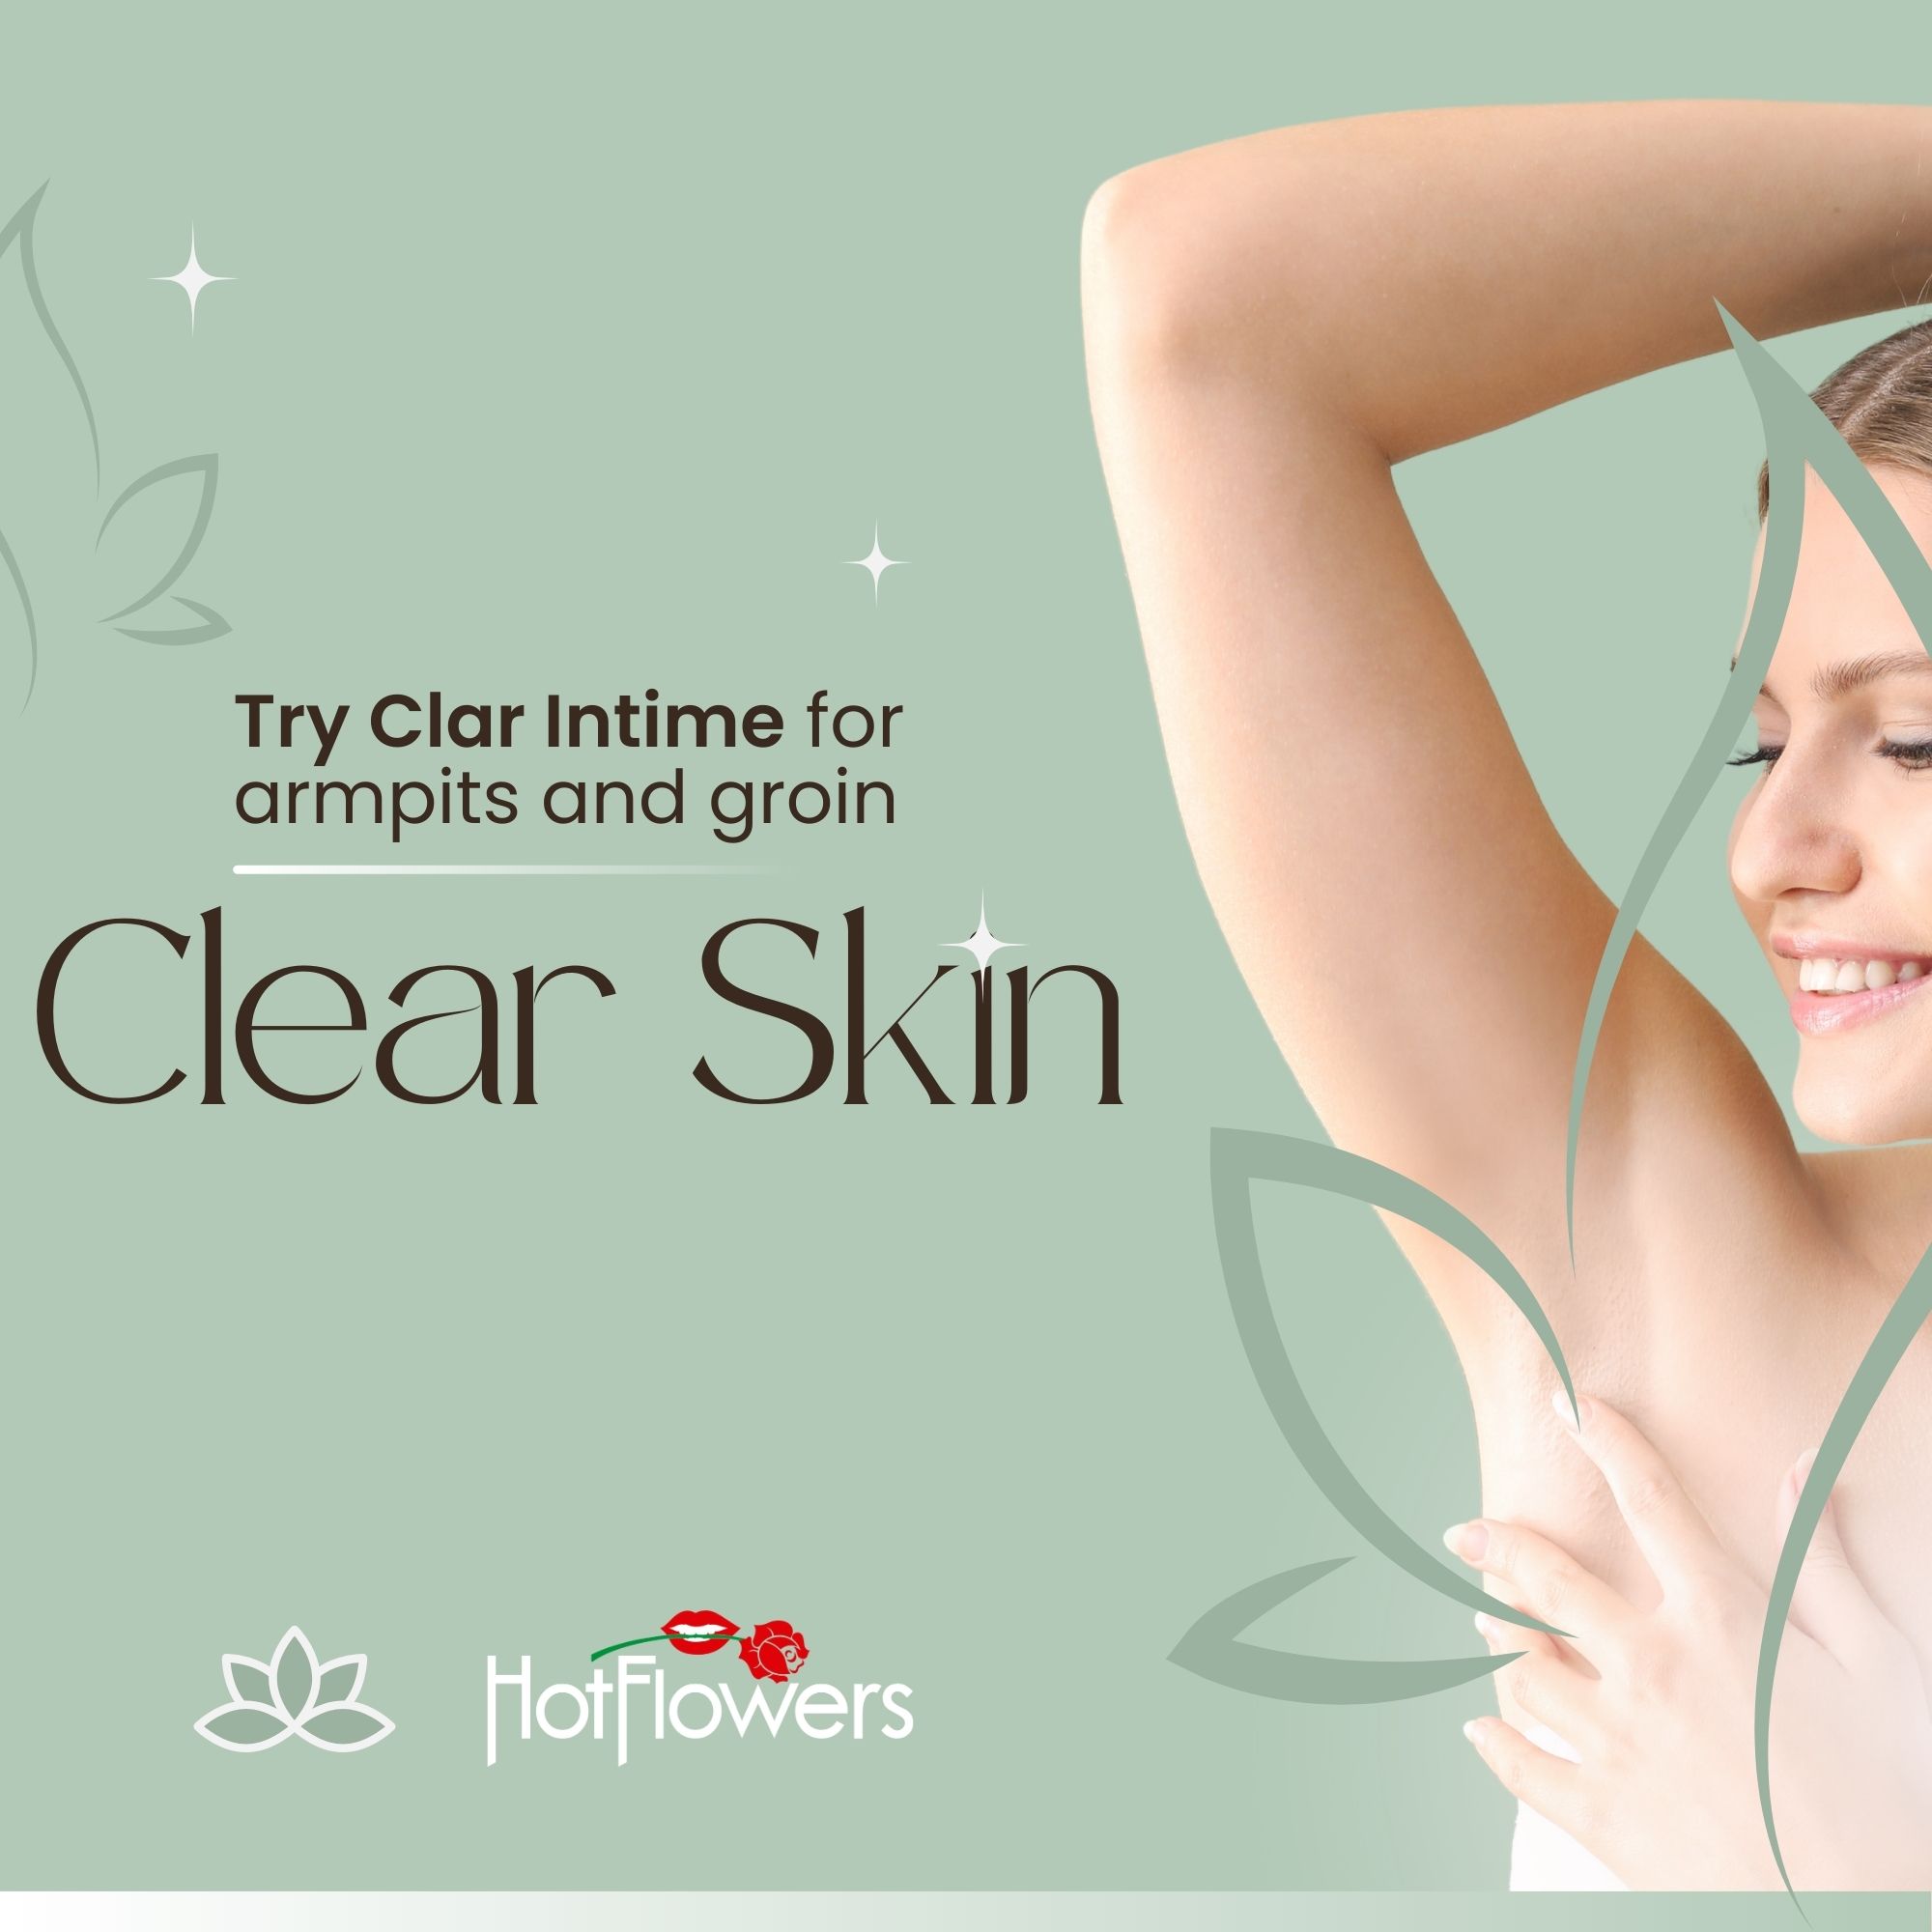 Clar Intime Buttocks, Groin, and Armpits Whitening Cream